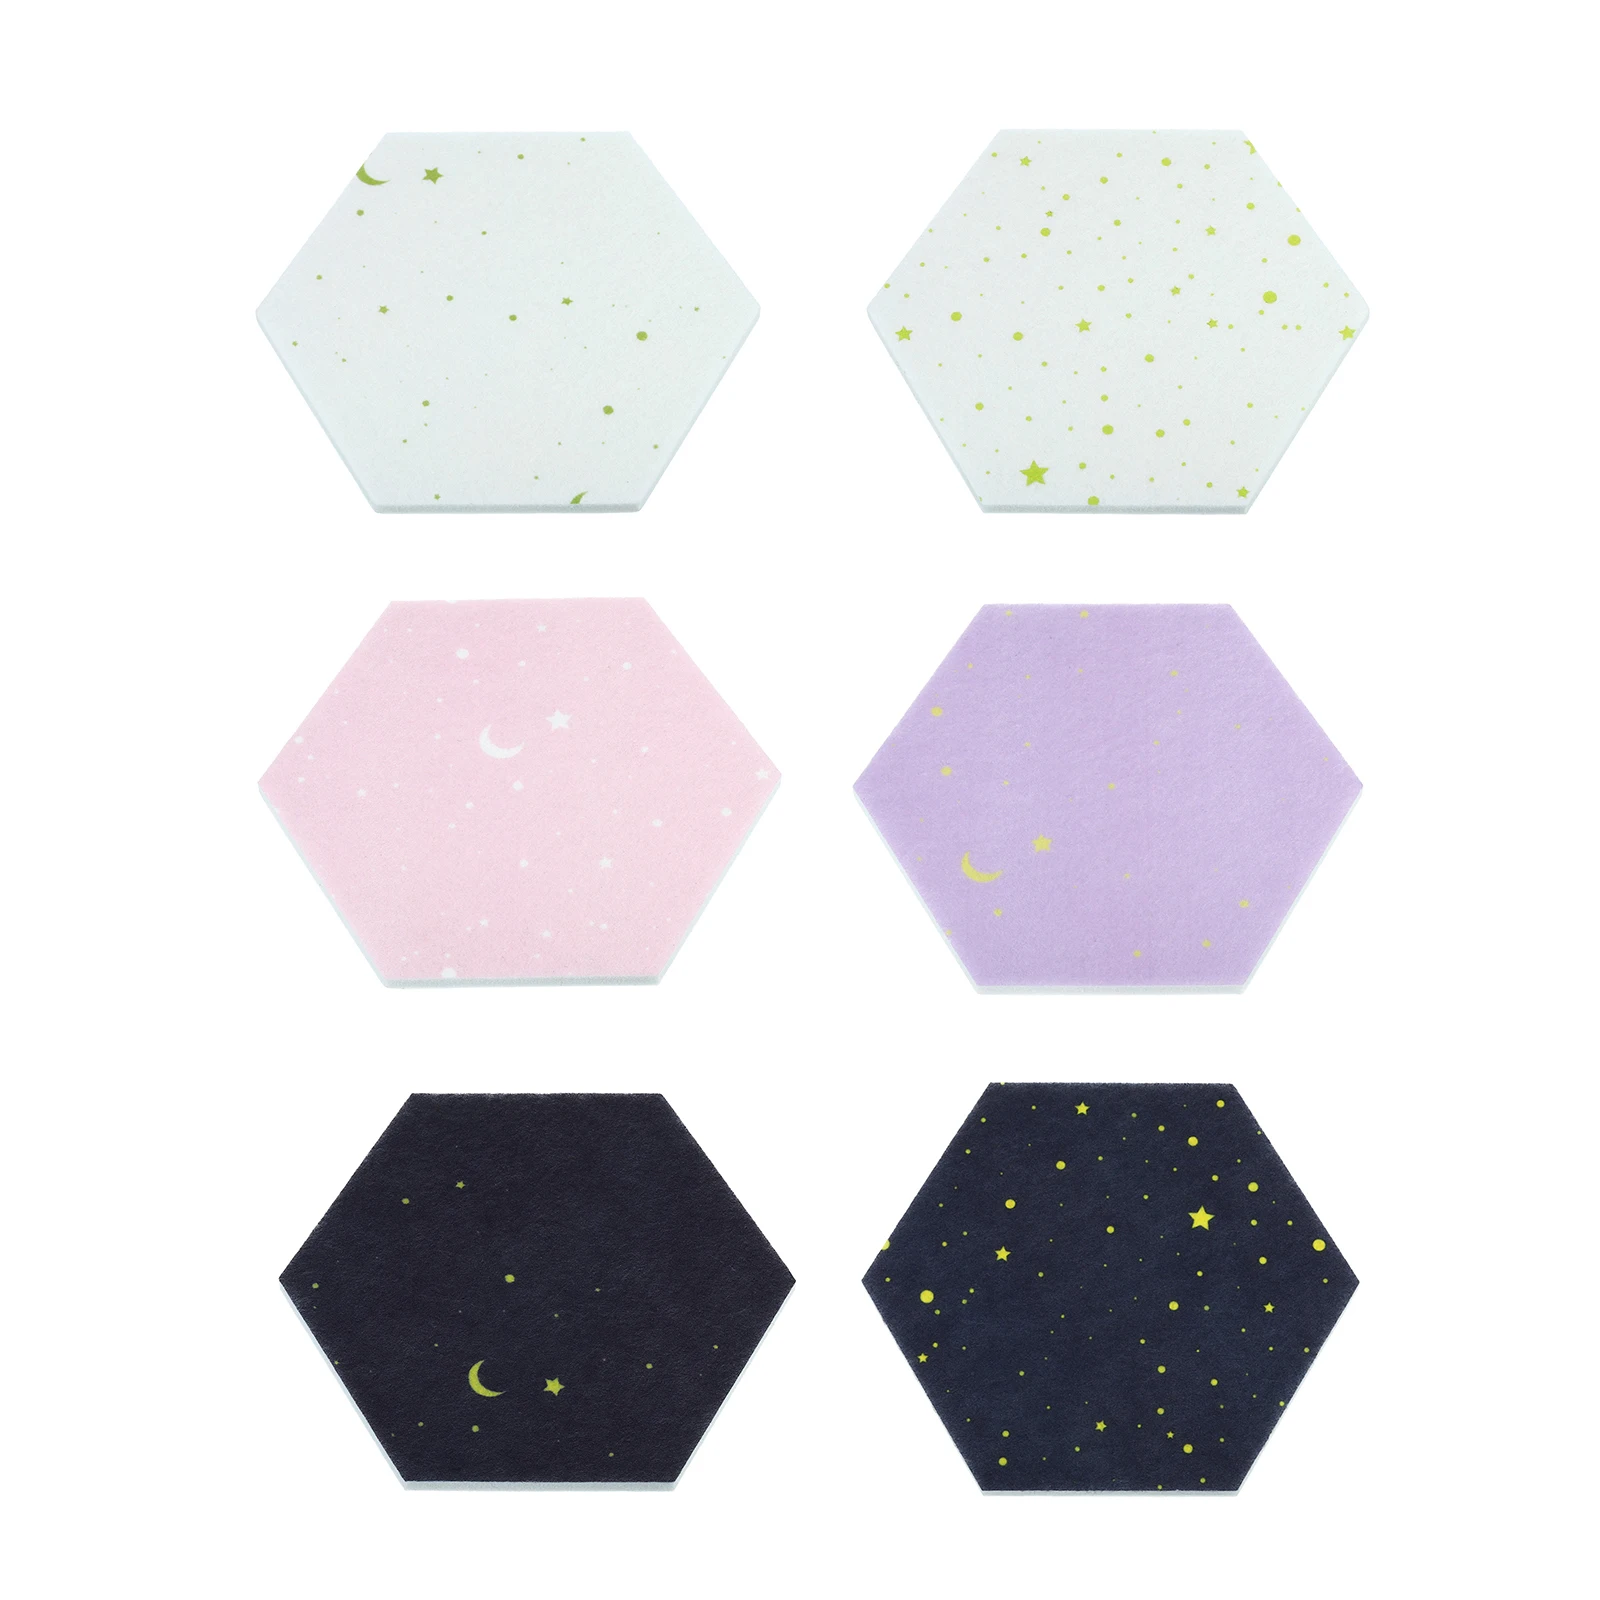 4Pcs Hexagon Felt Board Tile Bulletin Notice Cork Self Adhesive Pin Board Message Room Wall Decor Sticky Notes Photo Display nordic style felt background letter board photo wall household message display drop shipping